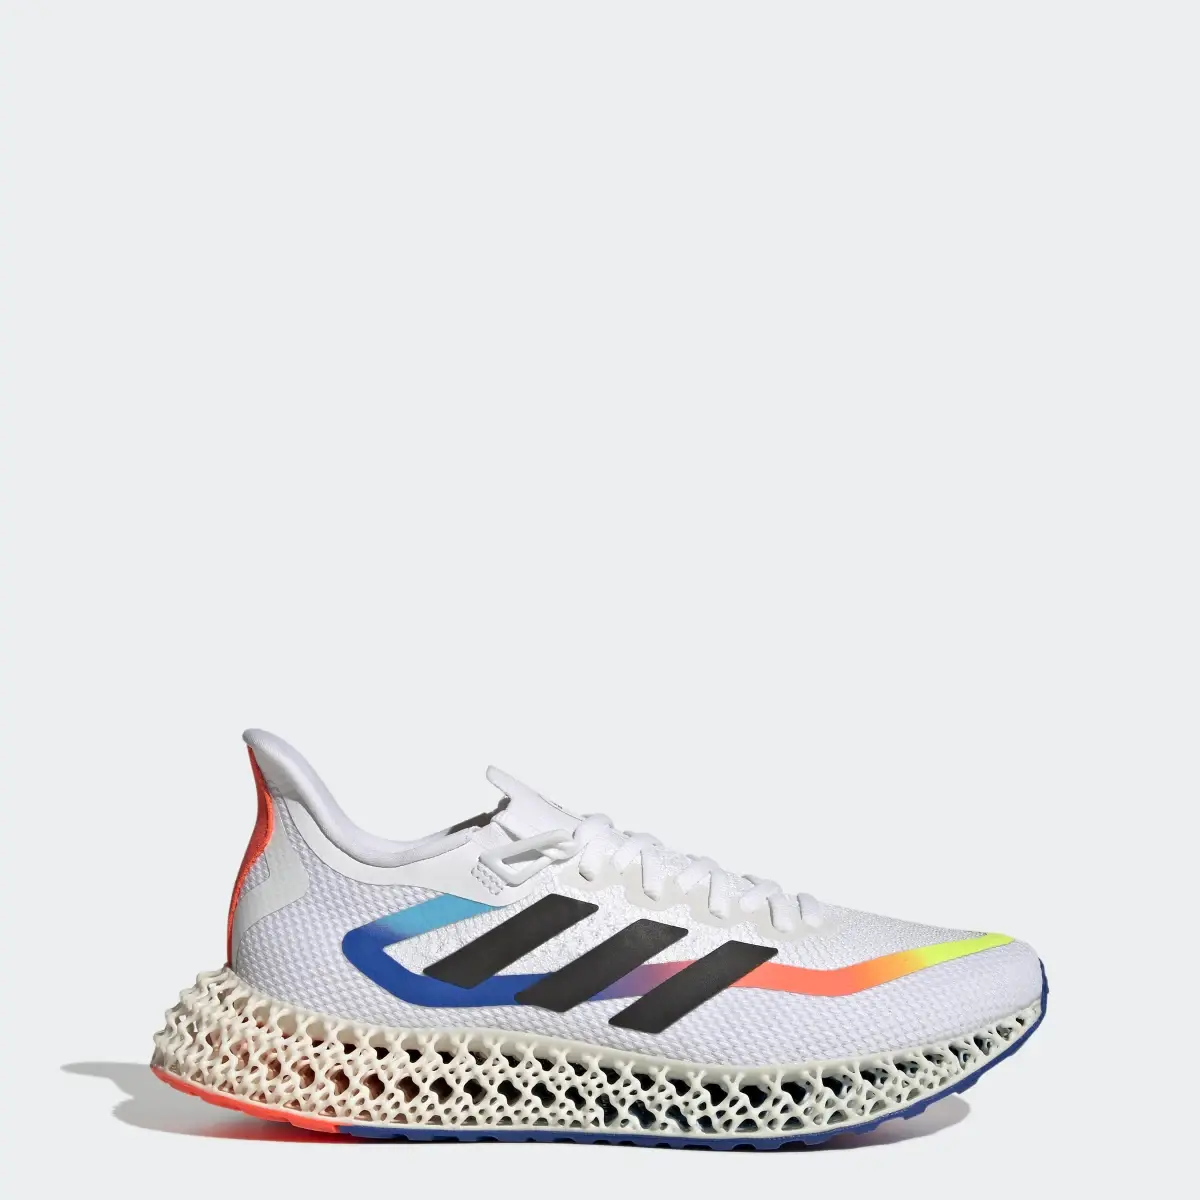 Adidas 4DFWD 2 Running Shoes. 1